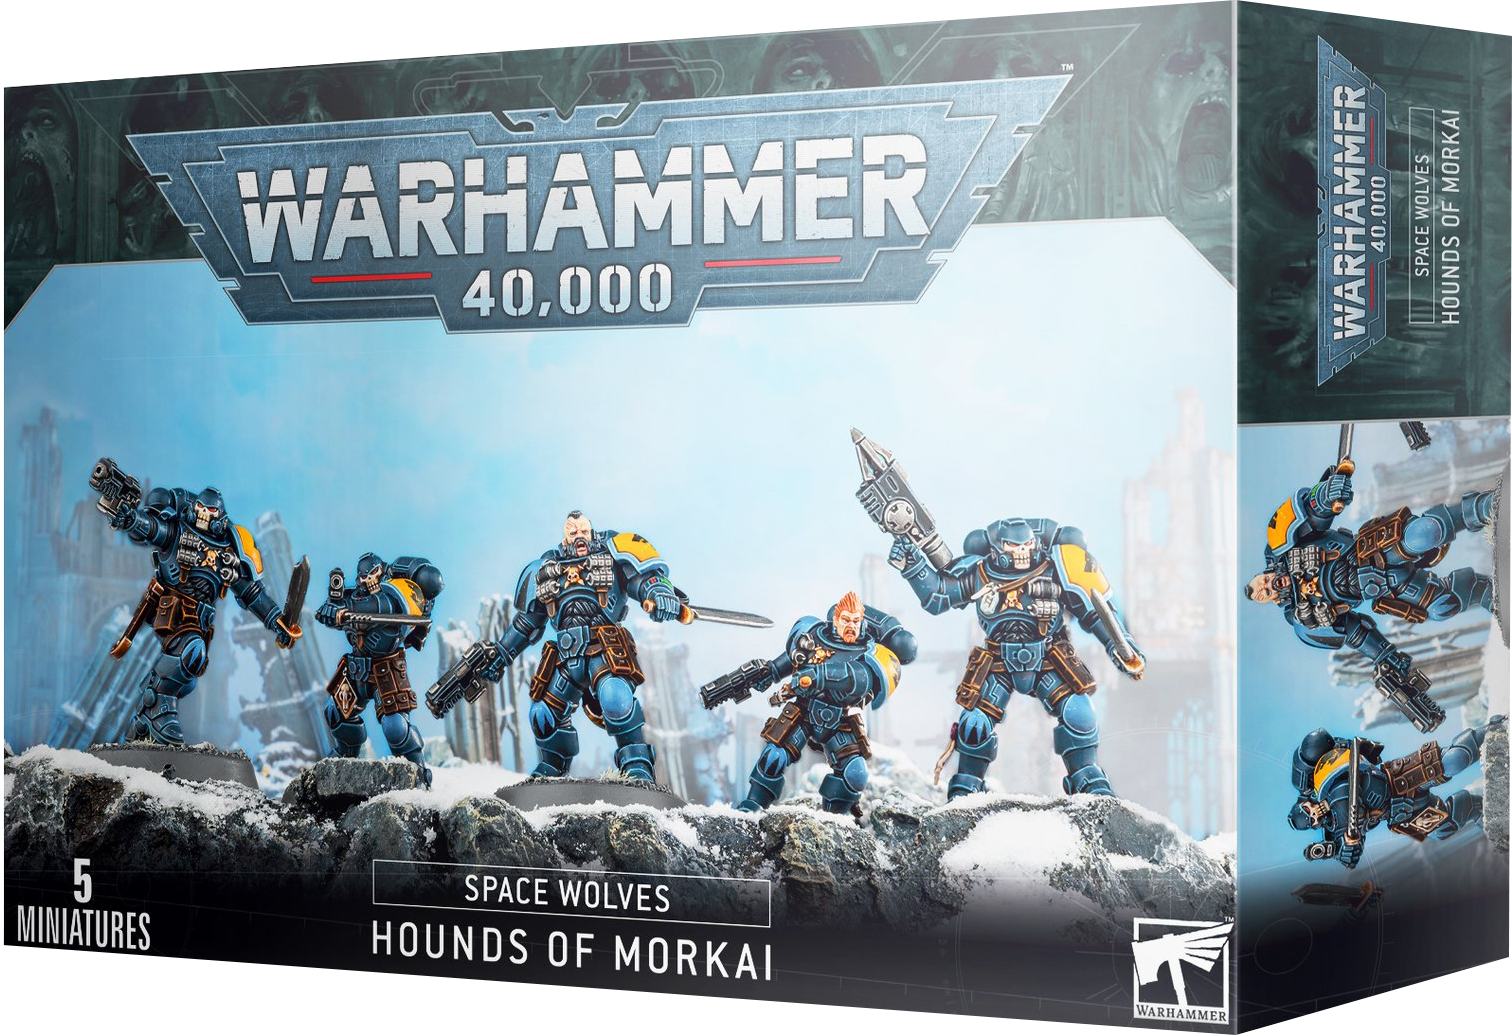 Warhammer 40,000: Space Wolves - Hounds of Morkai  (53-26)